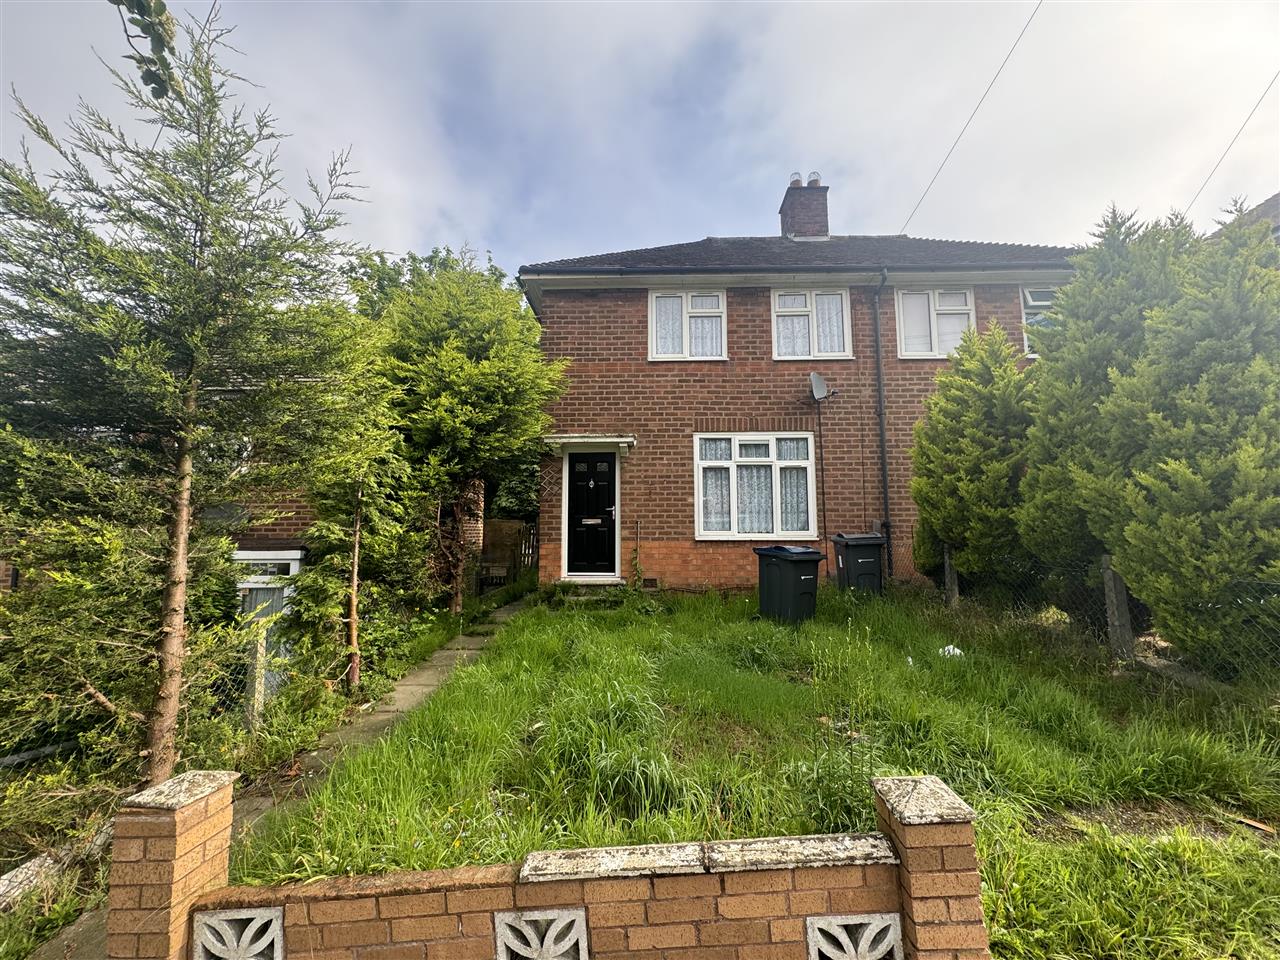 2 bed End Terraced House for rent in Birmingham. From Partridge Homes - Yardley